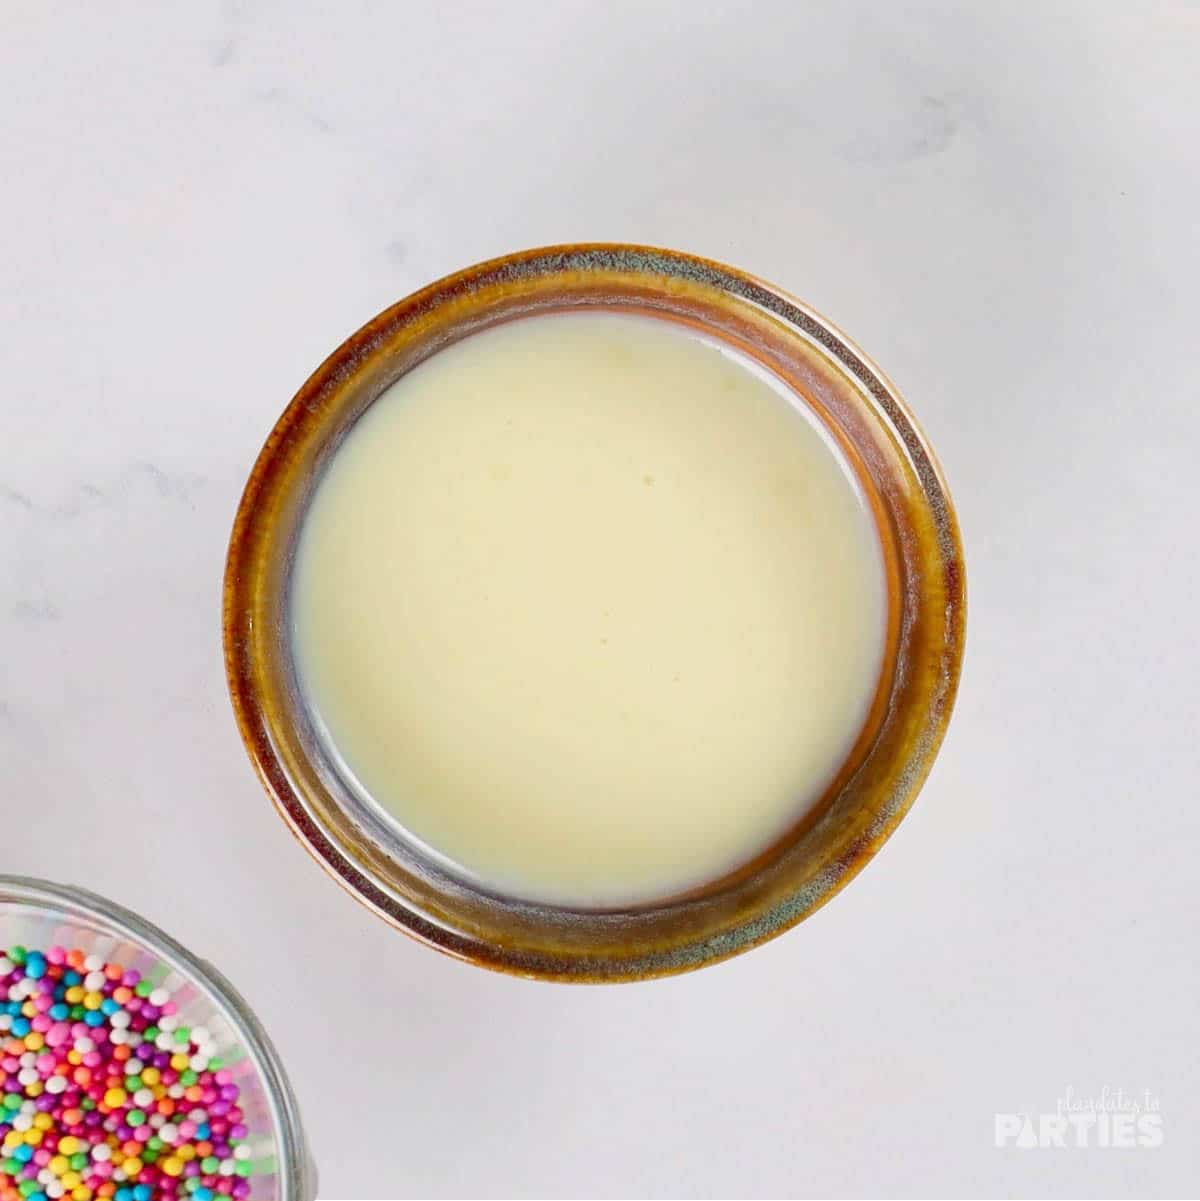 A small bowl of melted white chocolate with sprinkles nearby.